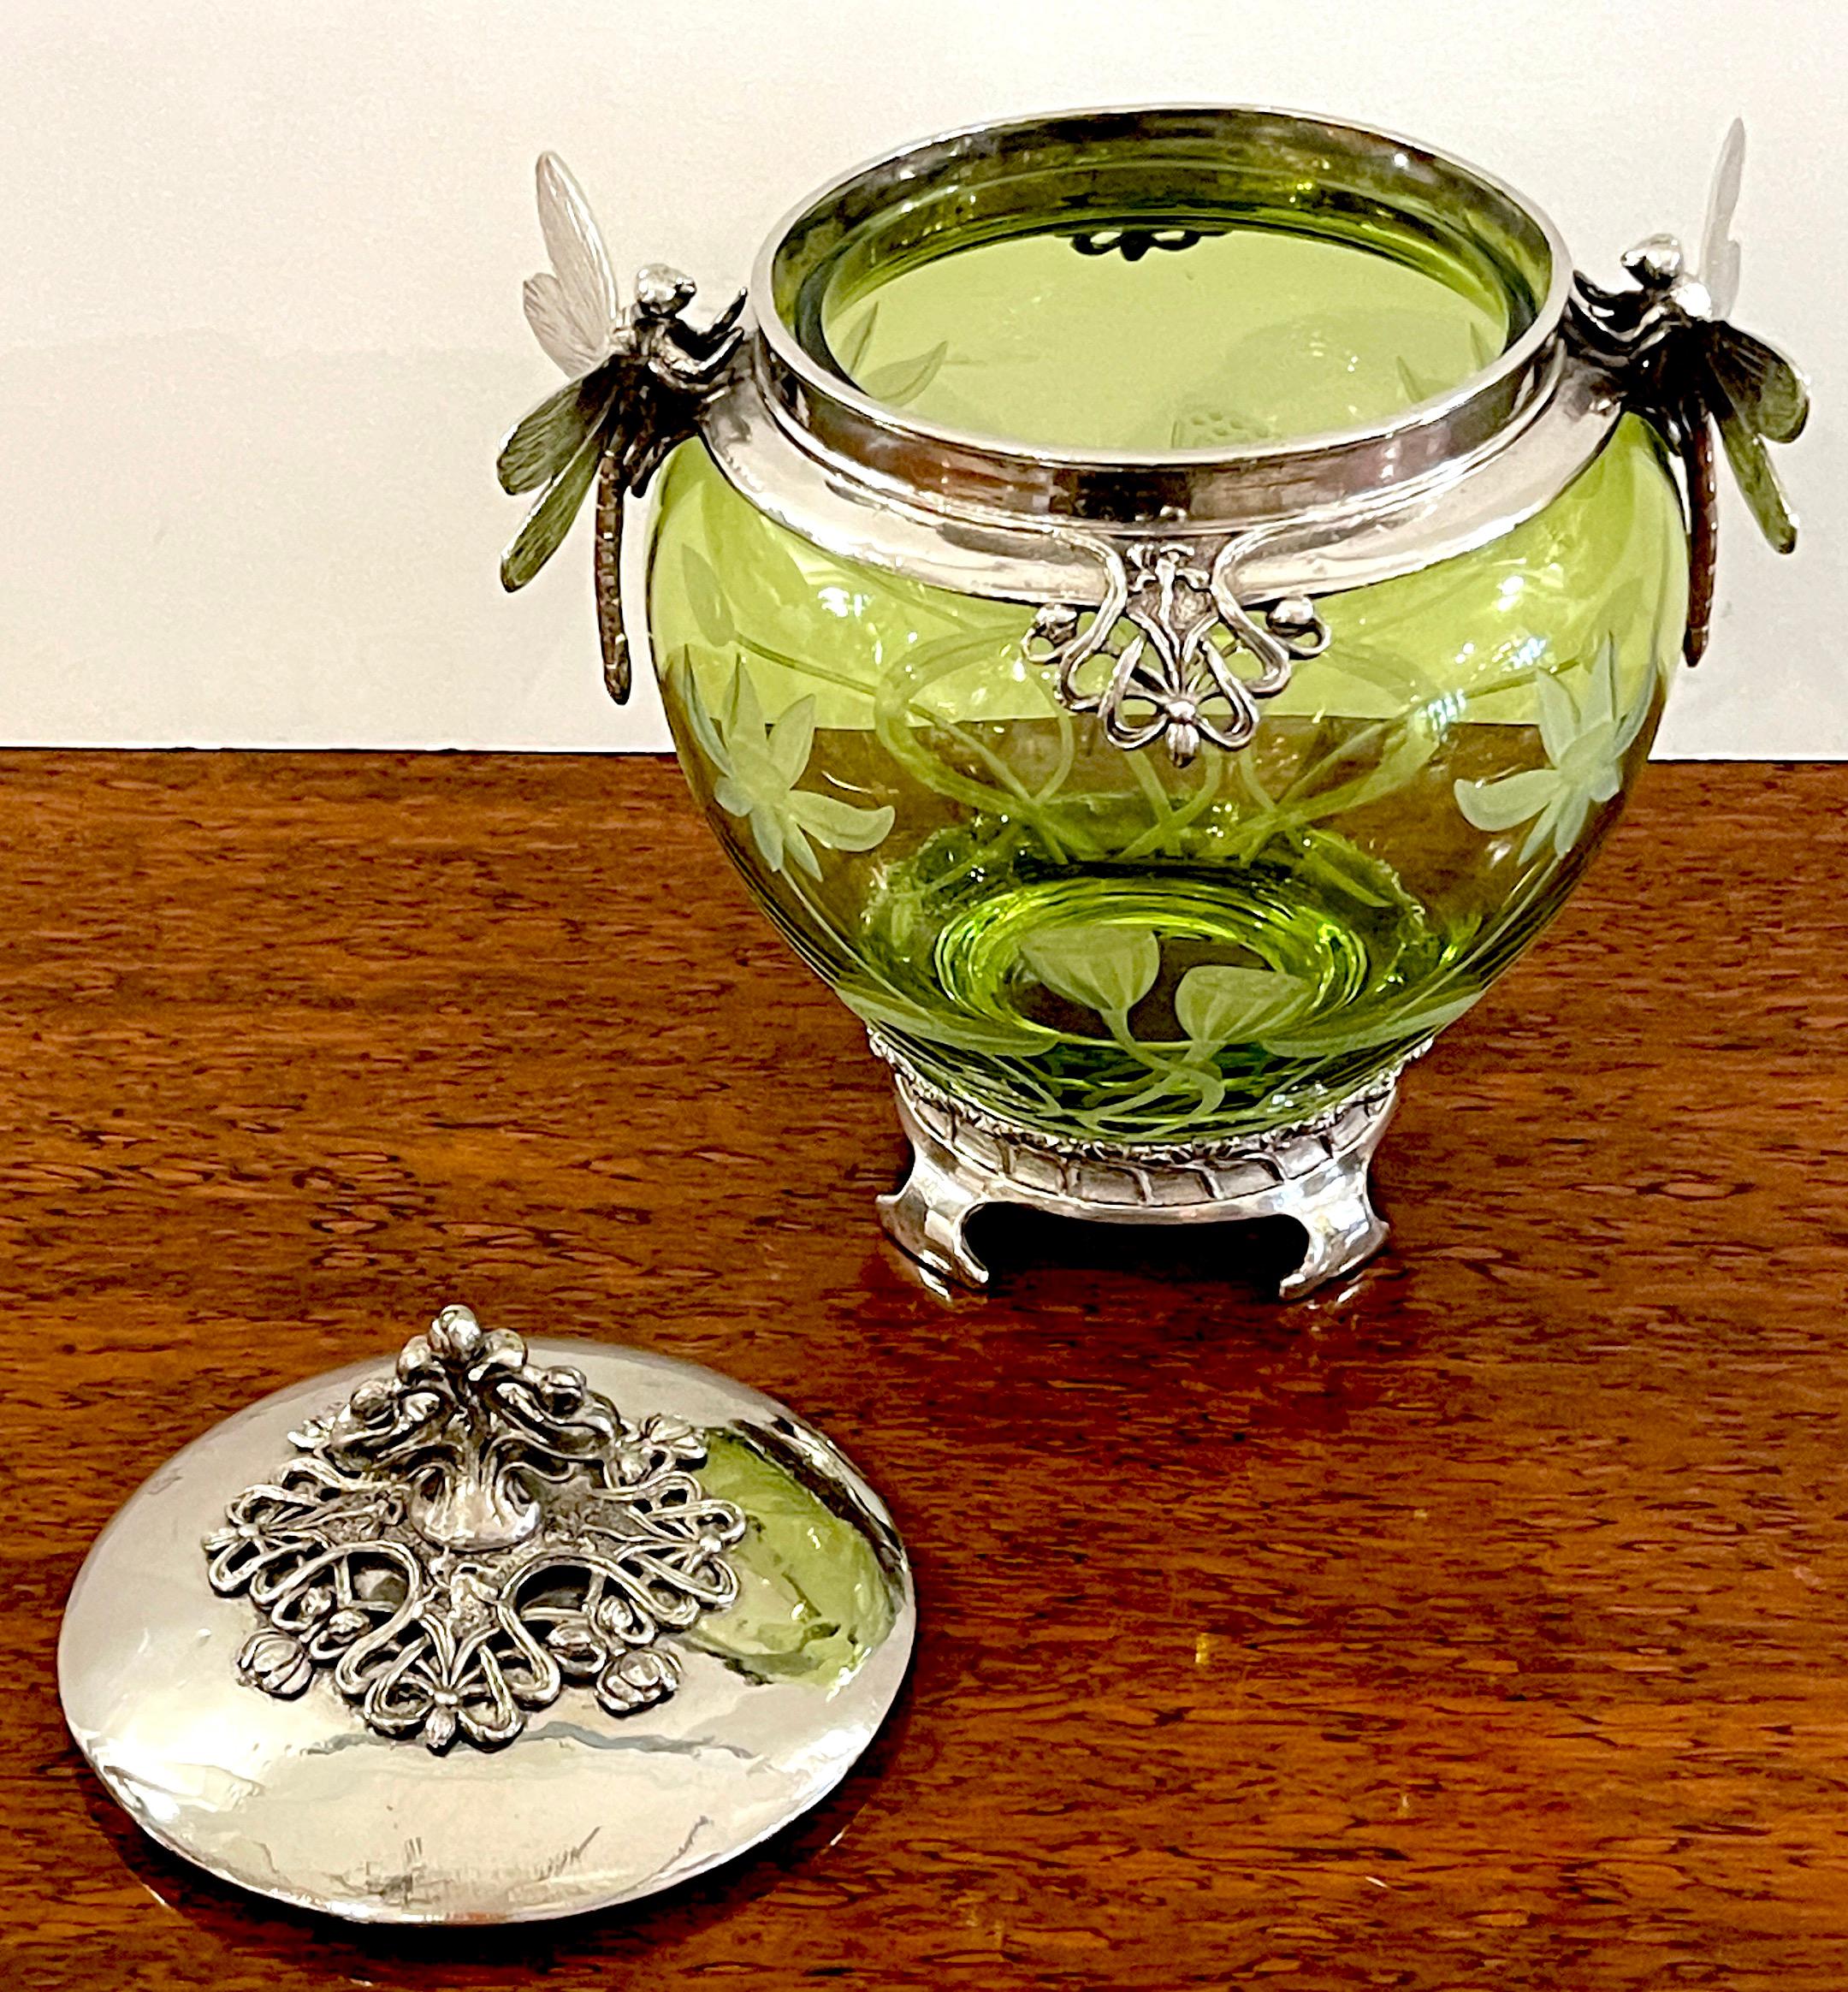 WMF Art Nouveau Silverplated Dragonfly Motif & Engraved Green Crystal Box For Sale 1